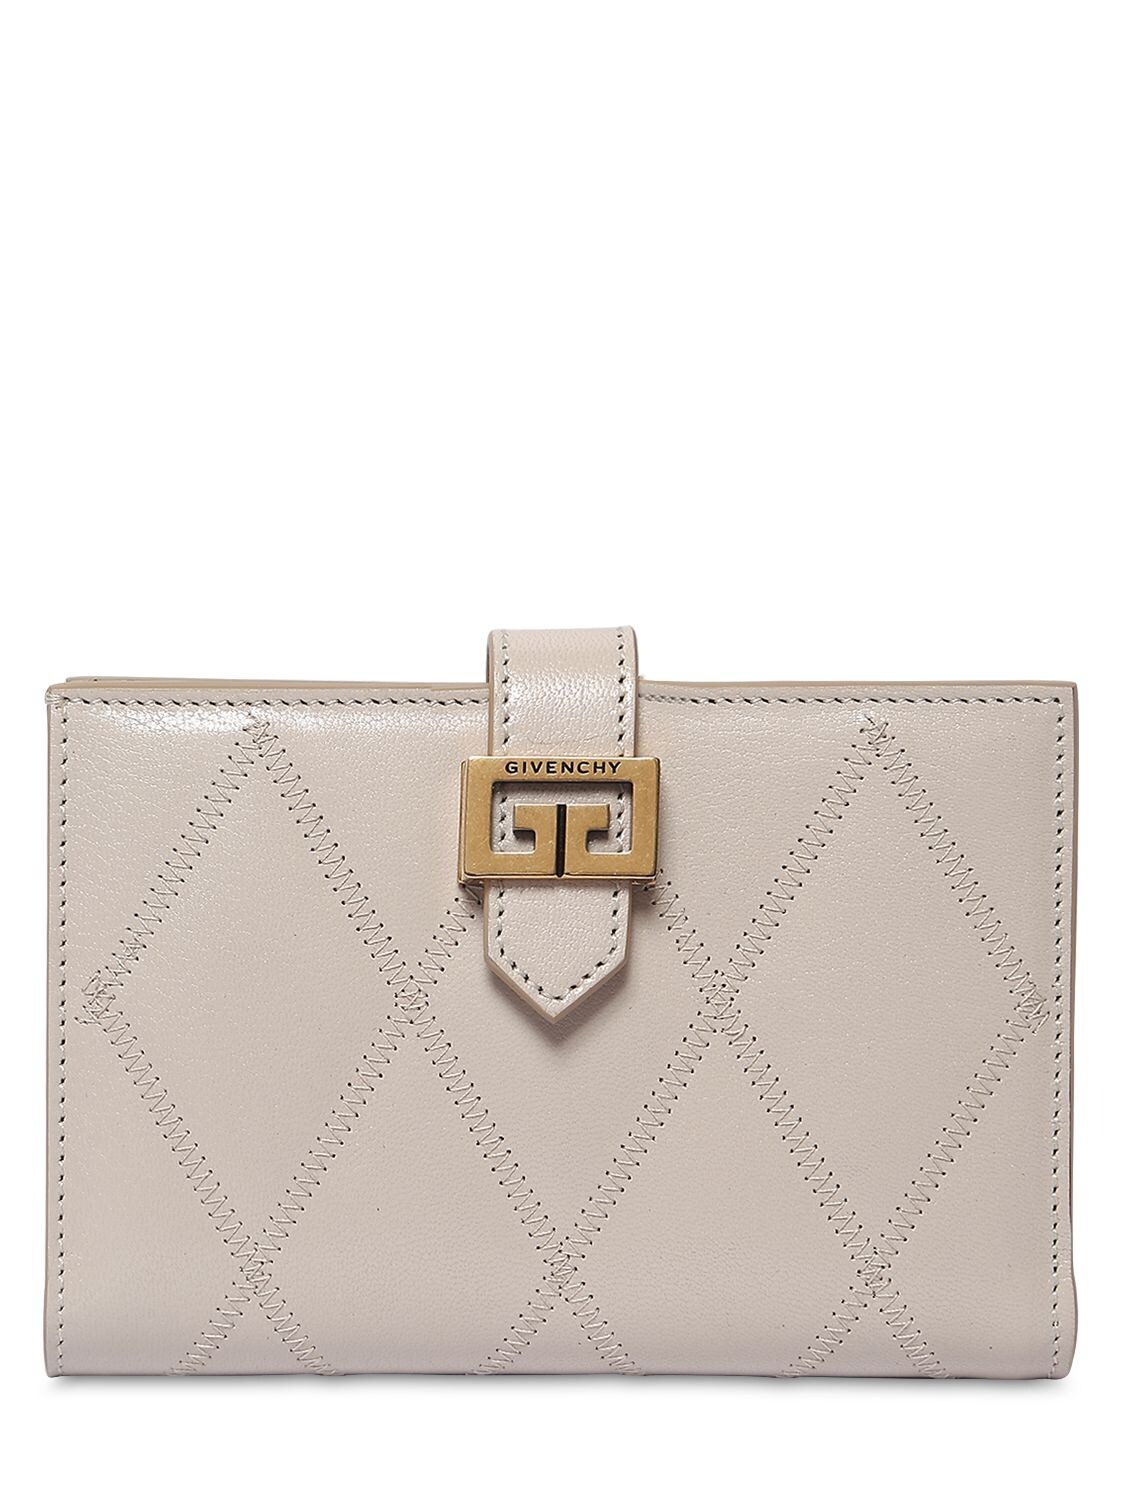 Givenchy Gv3 Quilted Leather Wallet In Natural